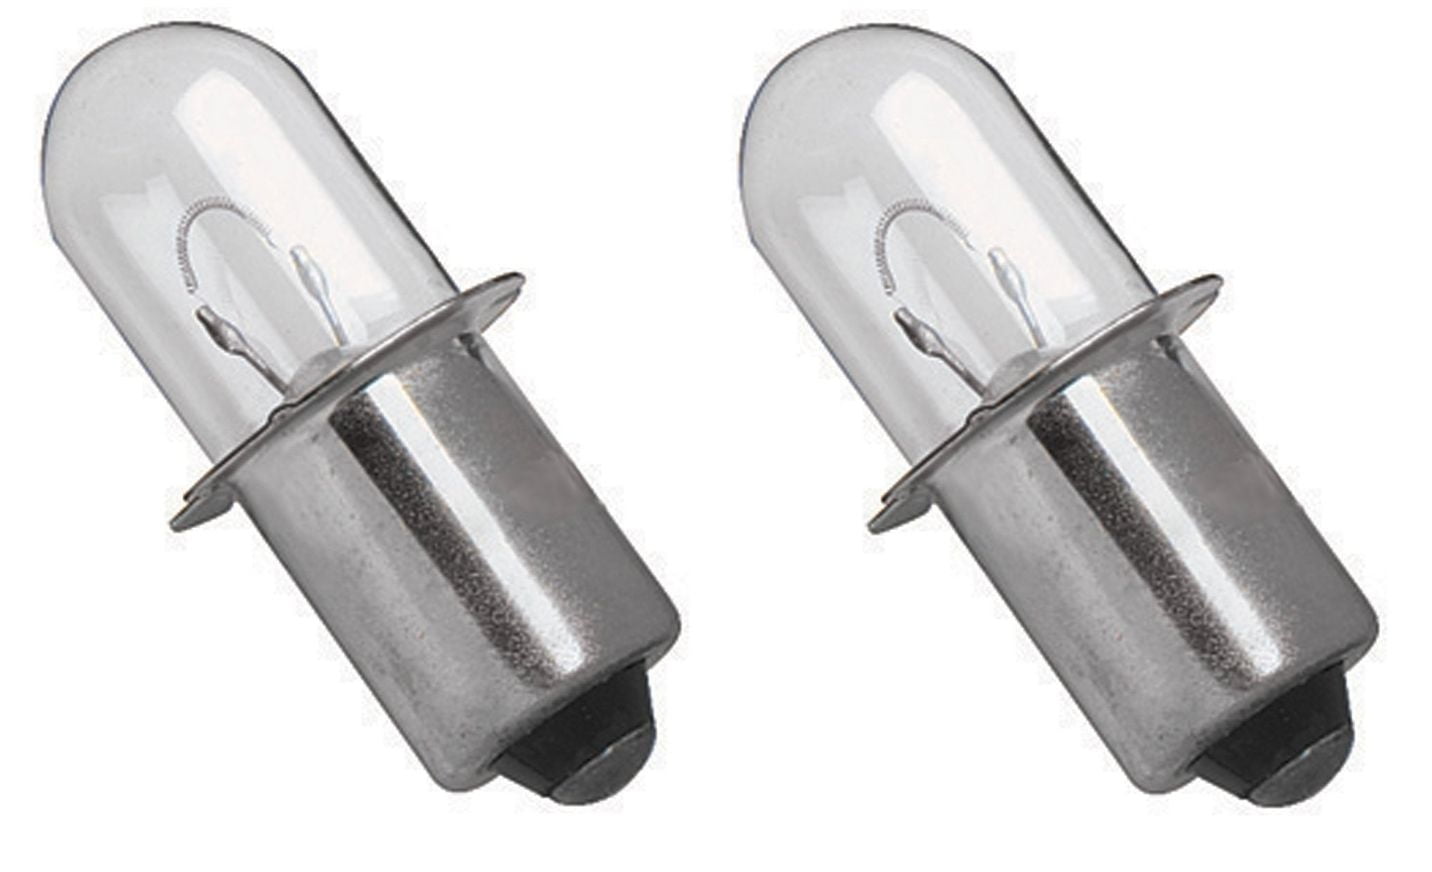 Plus 18V Worklight LED Replacement Bulb P13.5S 1 Watt or 5 Watt NEW Details about   RYOBI ONE 